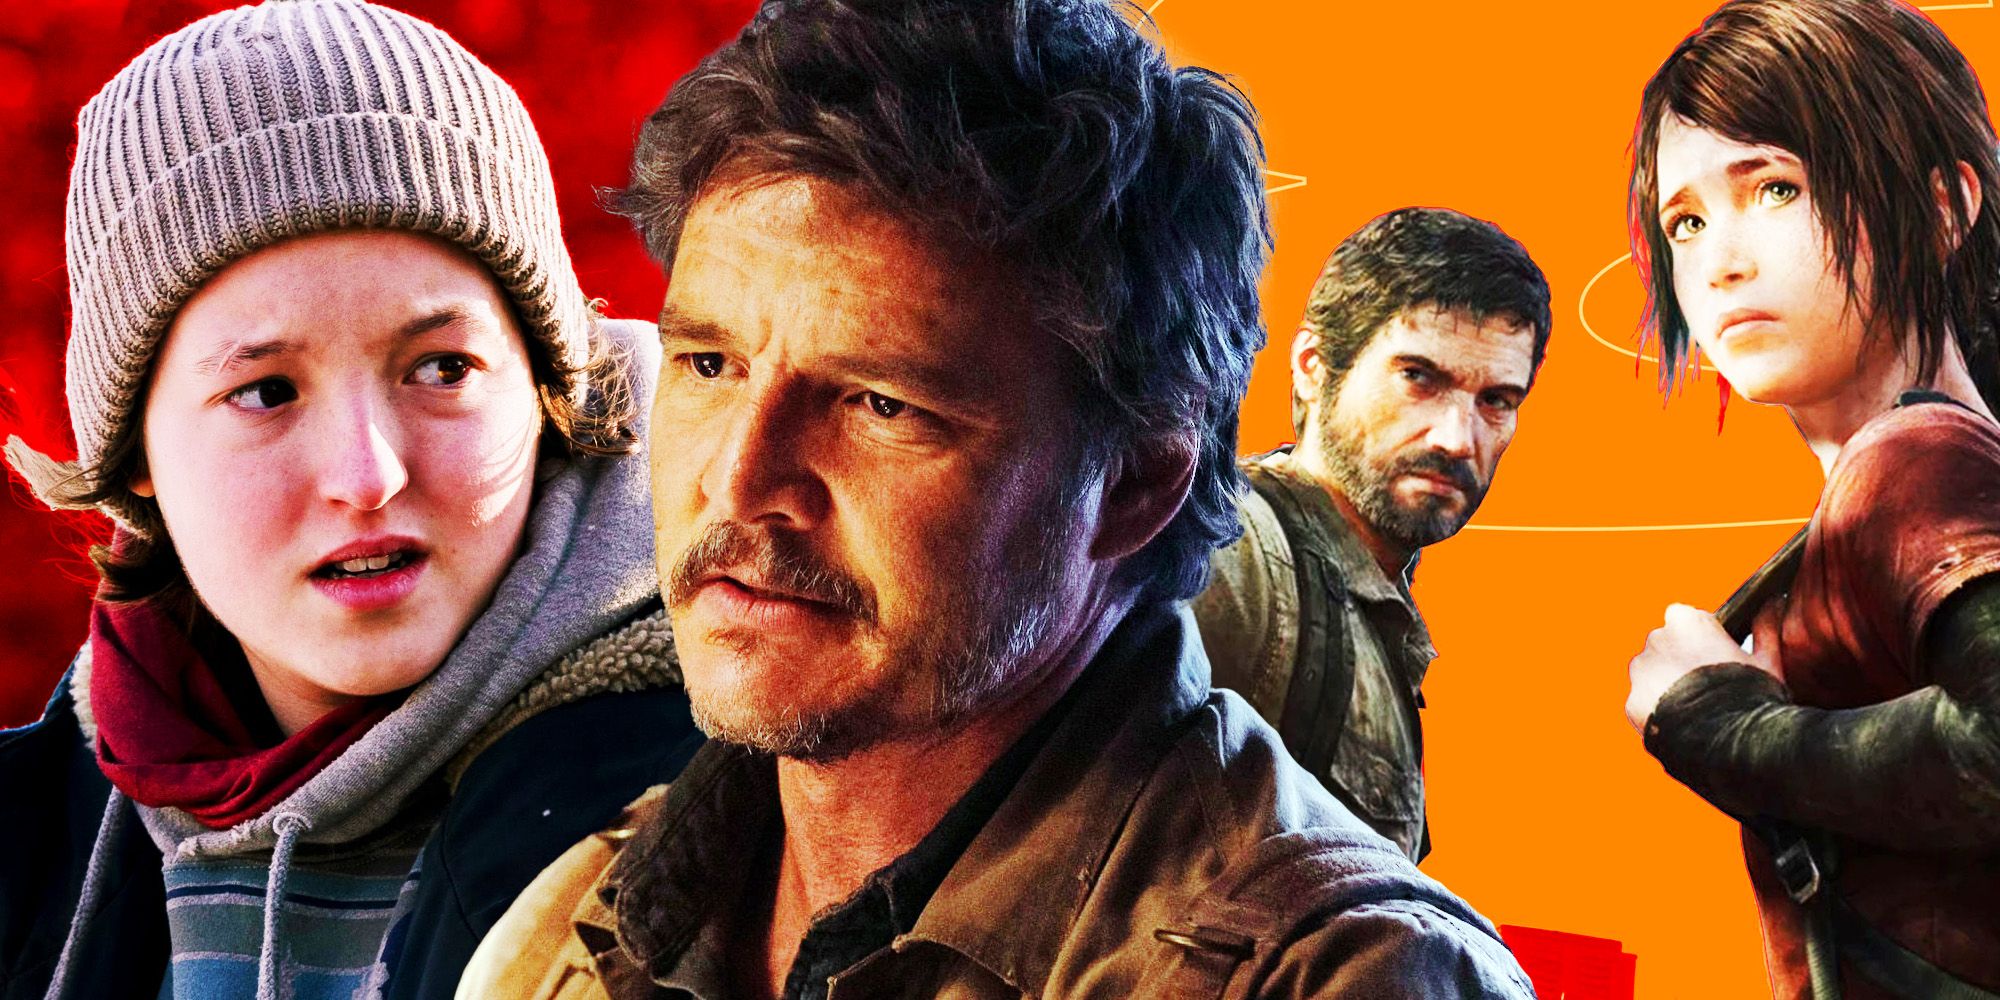 How Old The Last Of Us Actors Are Compared To Their Characters